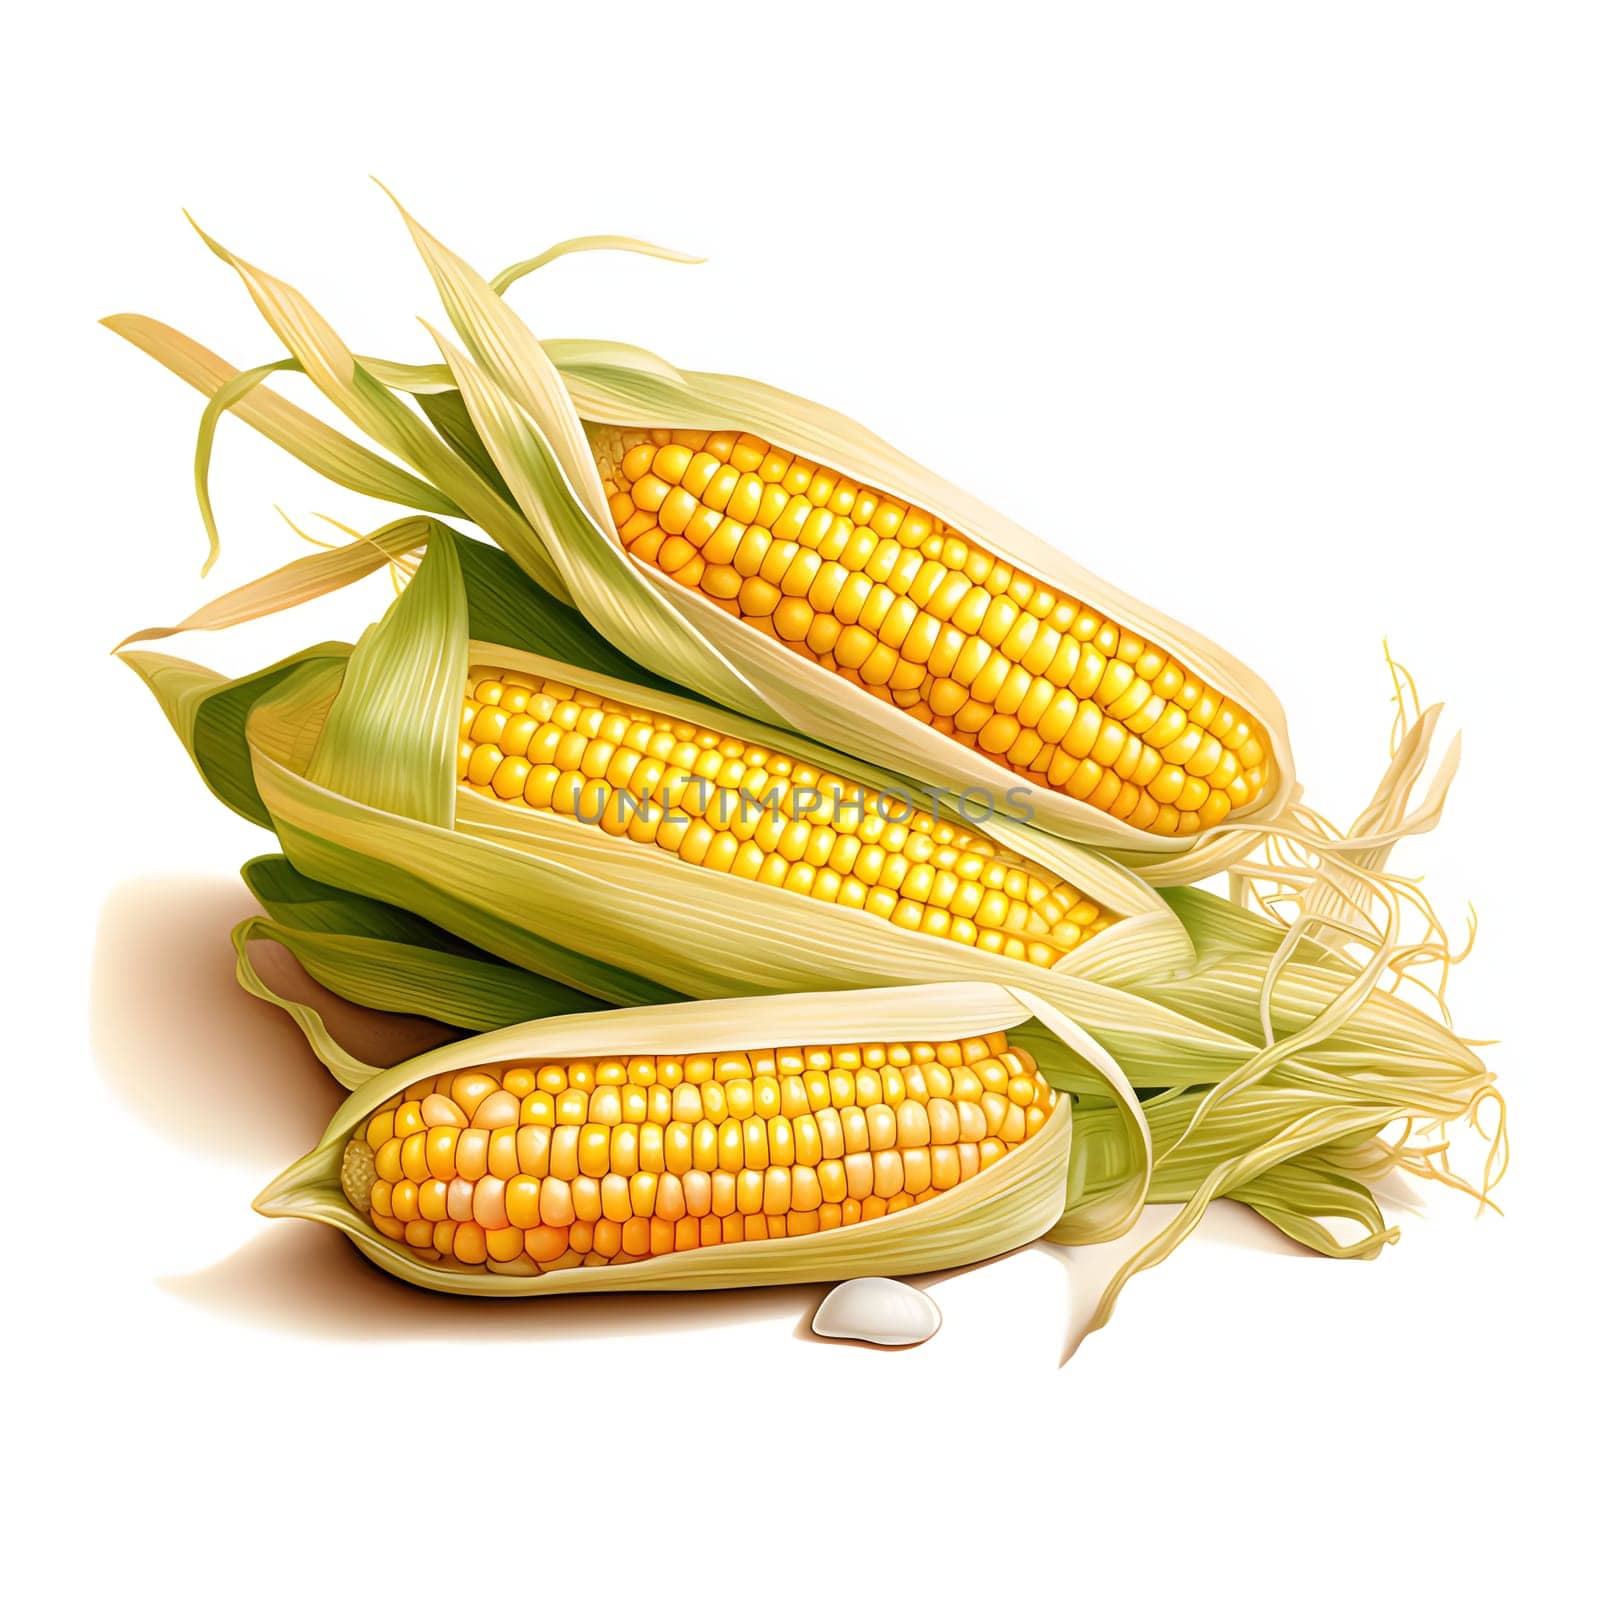 Three yellow corn cobs in green leaves. Corn as a dish of thanksgiving for the harvest, a picture on a white isolated background. An atmosphere of joy and celebration.